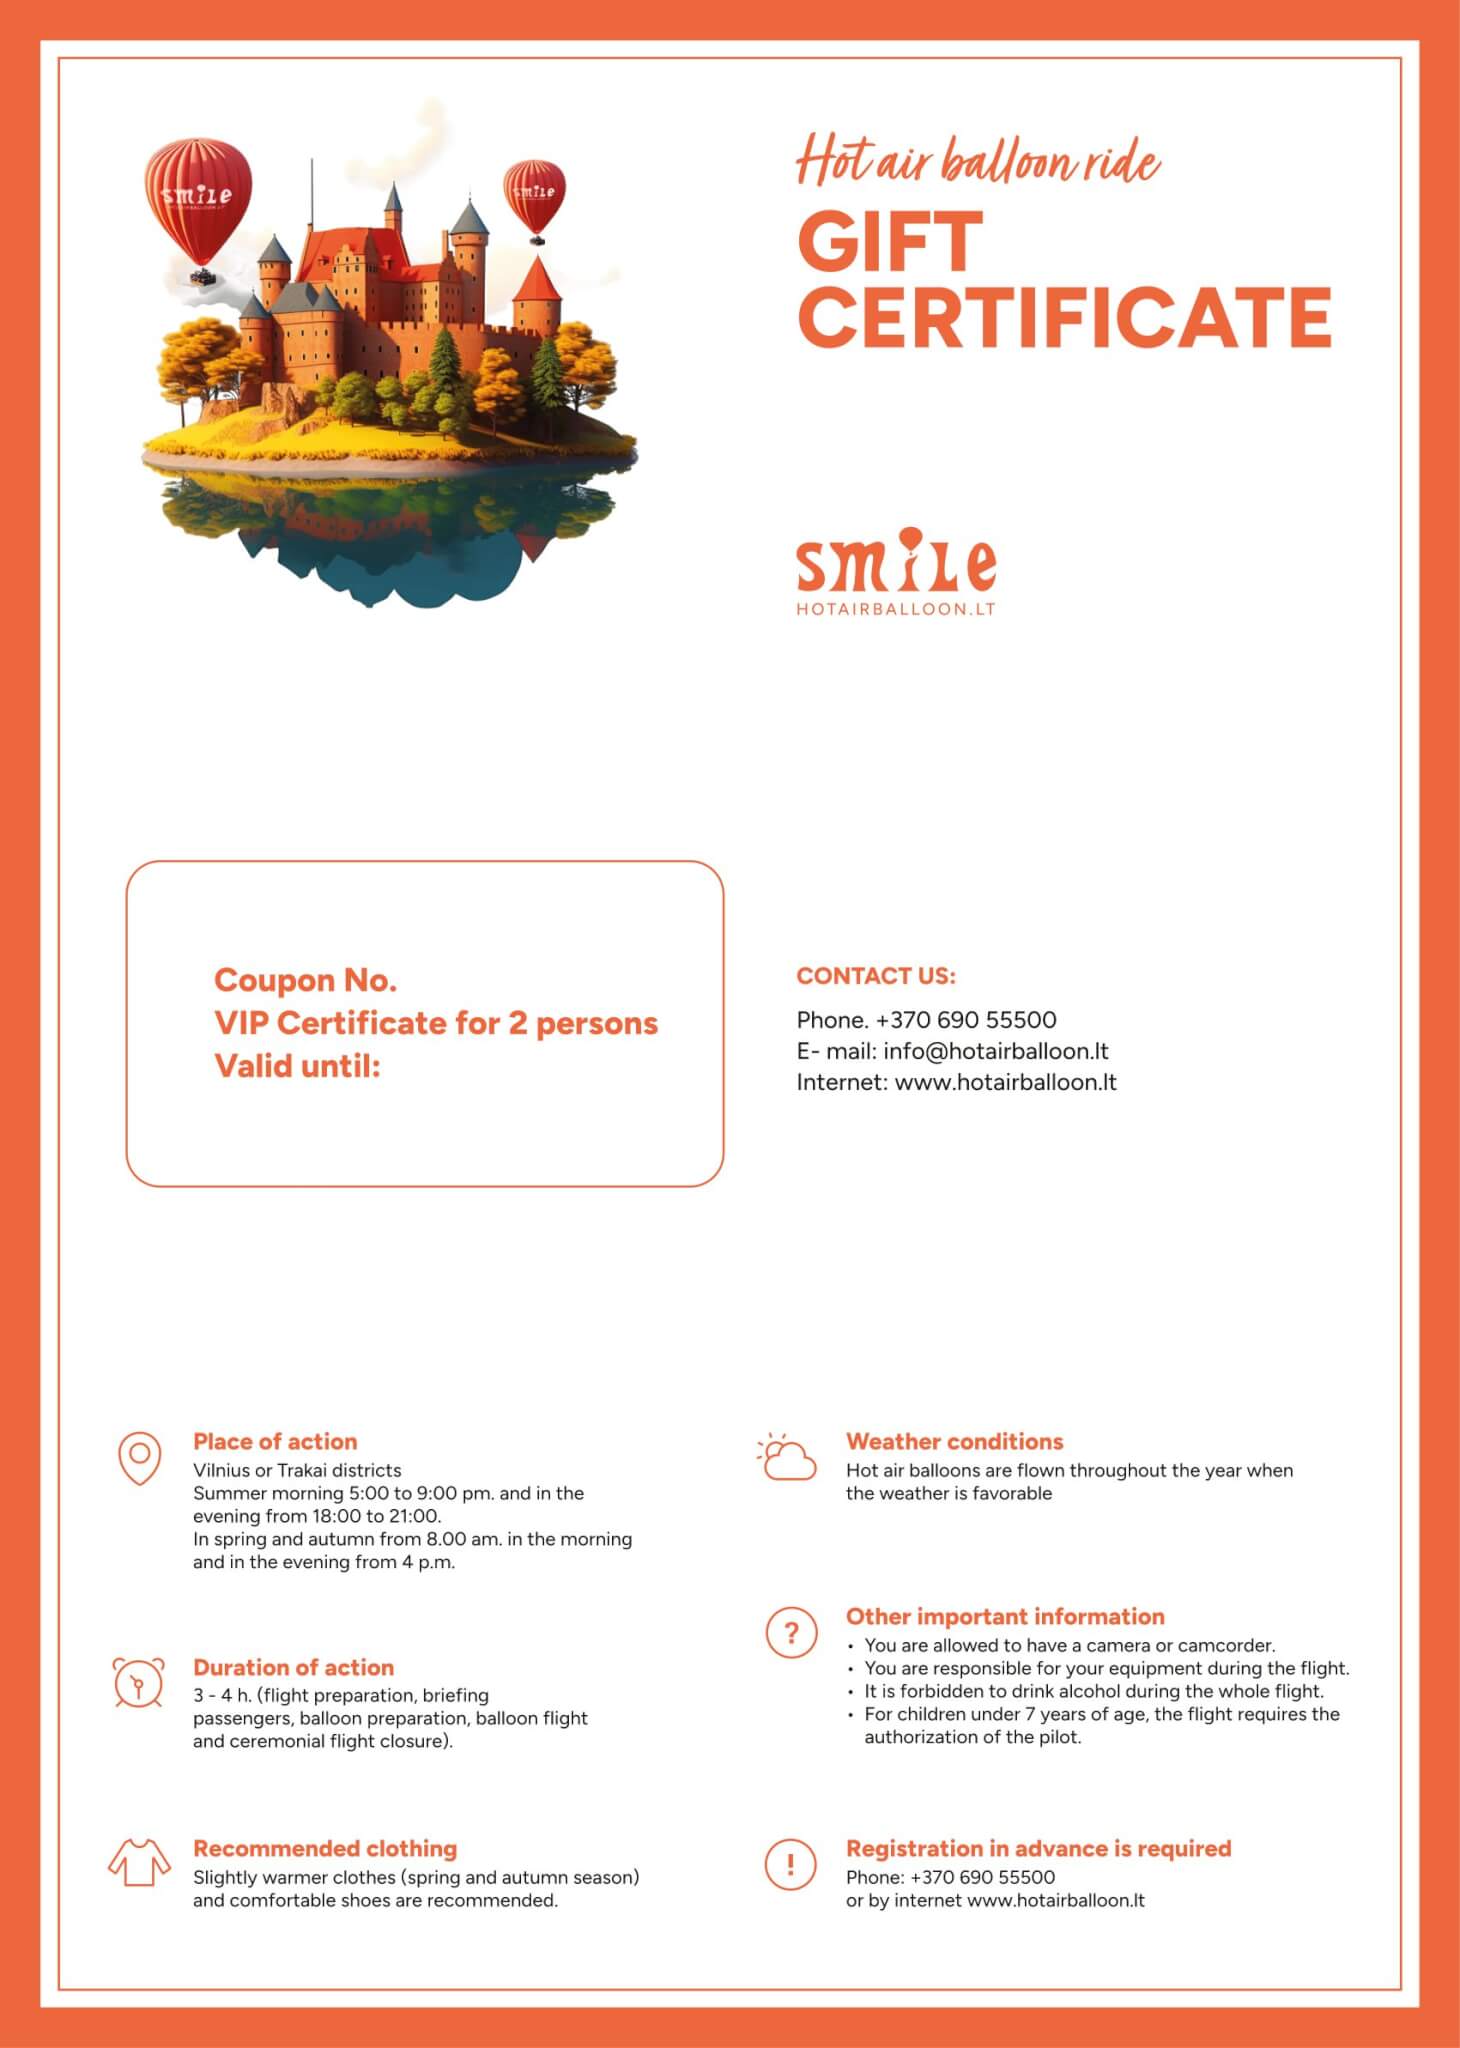 A certificate featuring a castle and mesmerizing hot air balloons.